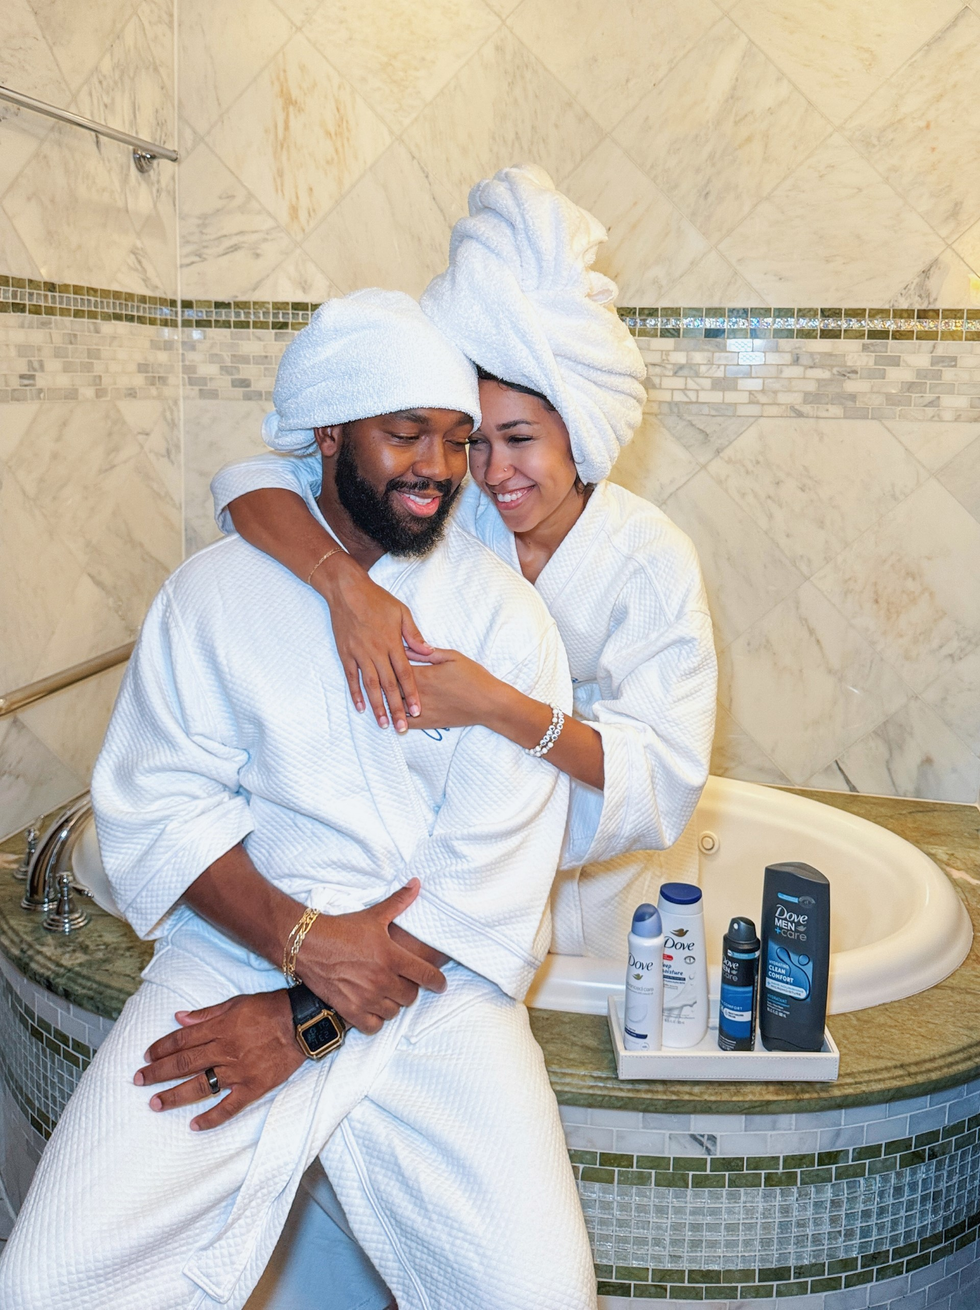 jayla-henry-tony-henry-share-an-embrace-in-bathtub-while-wearing-white-towel-turbans-and-bath-robes